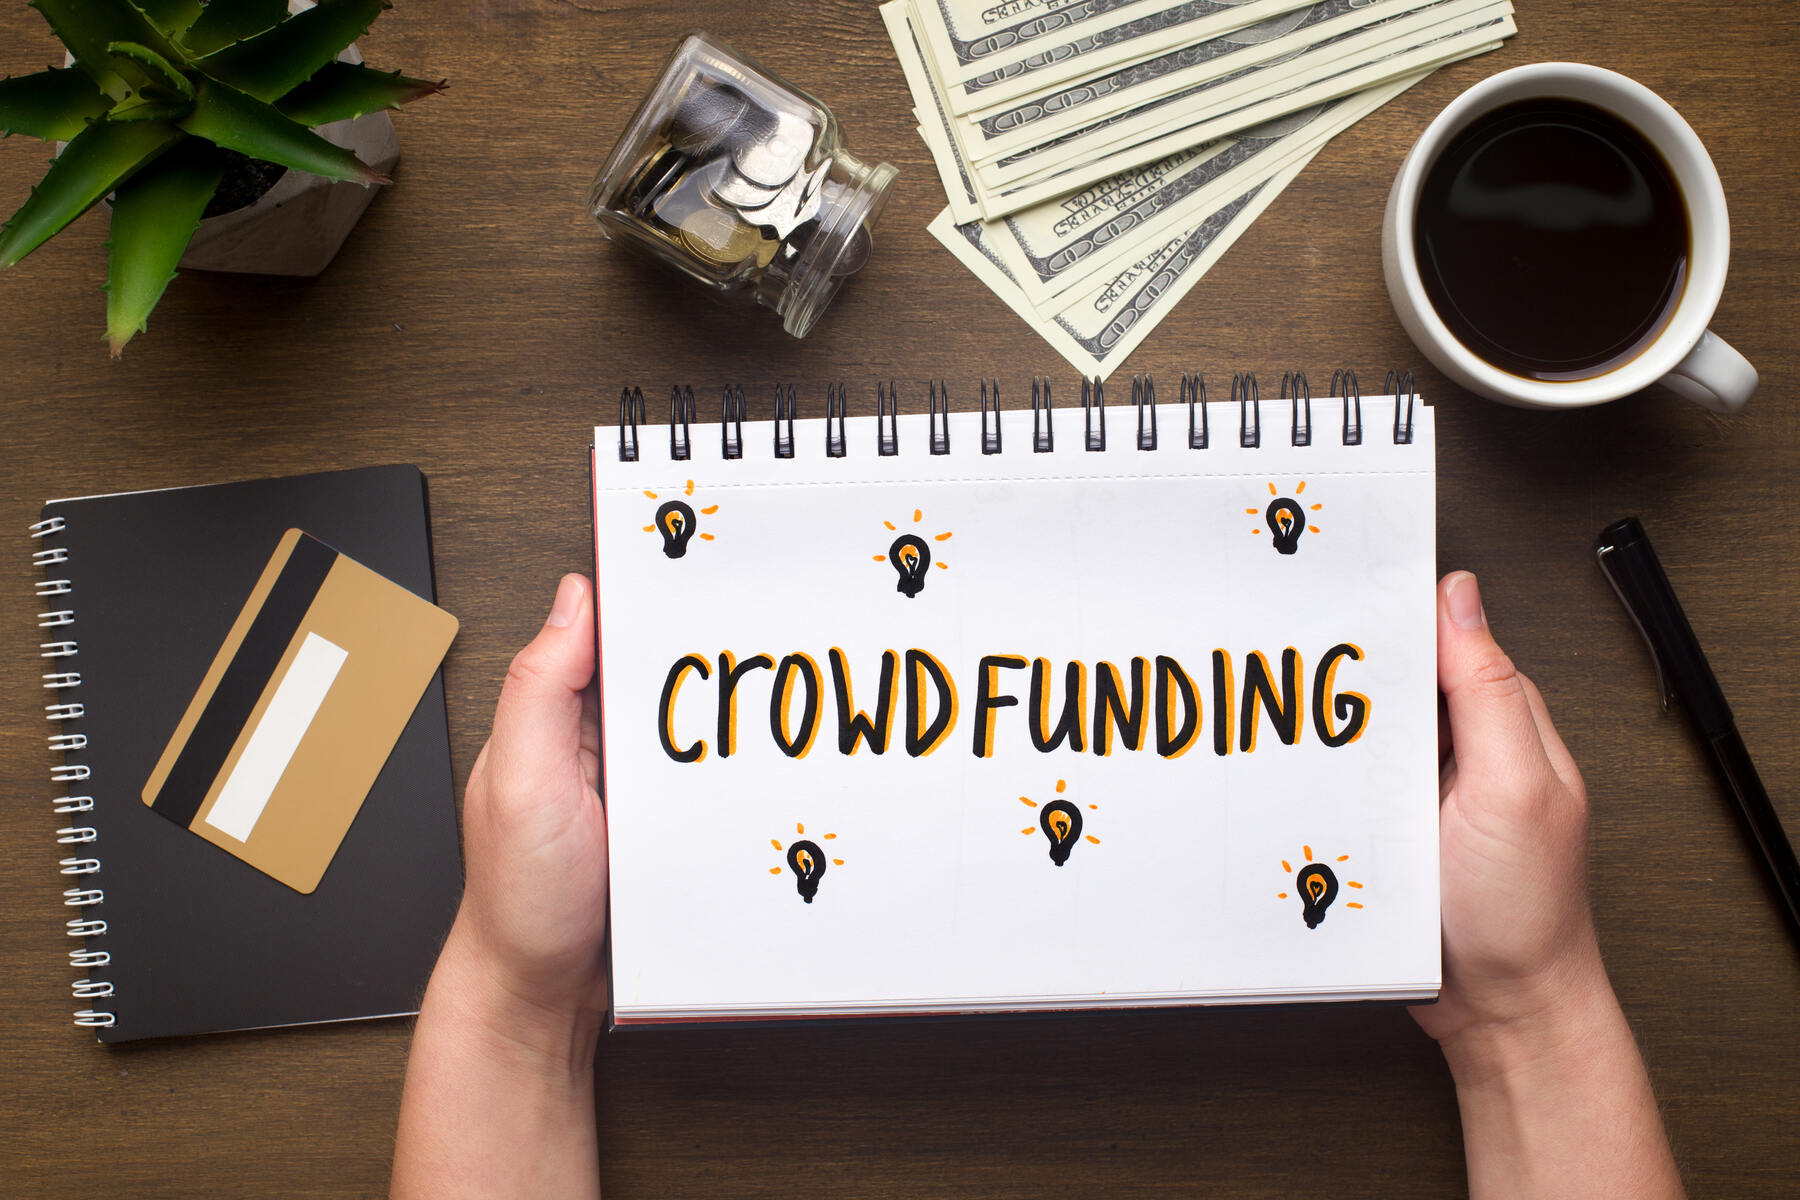 Where Can I Get Crowdfunding?